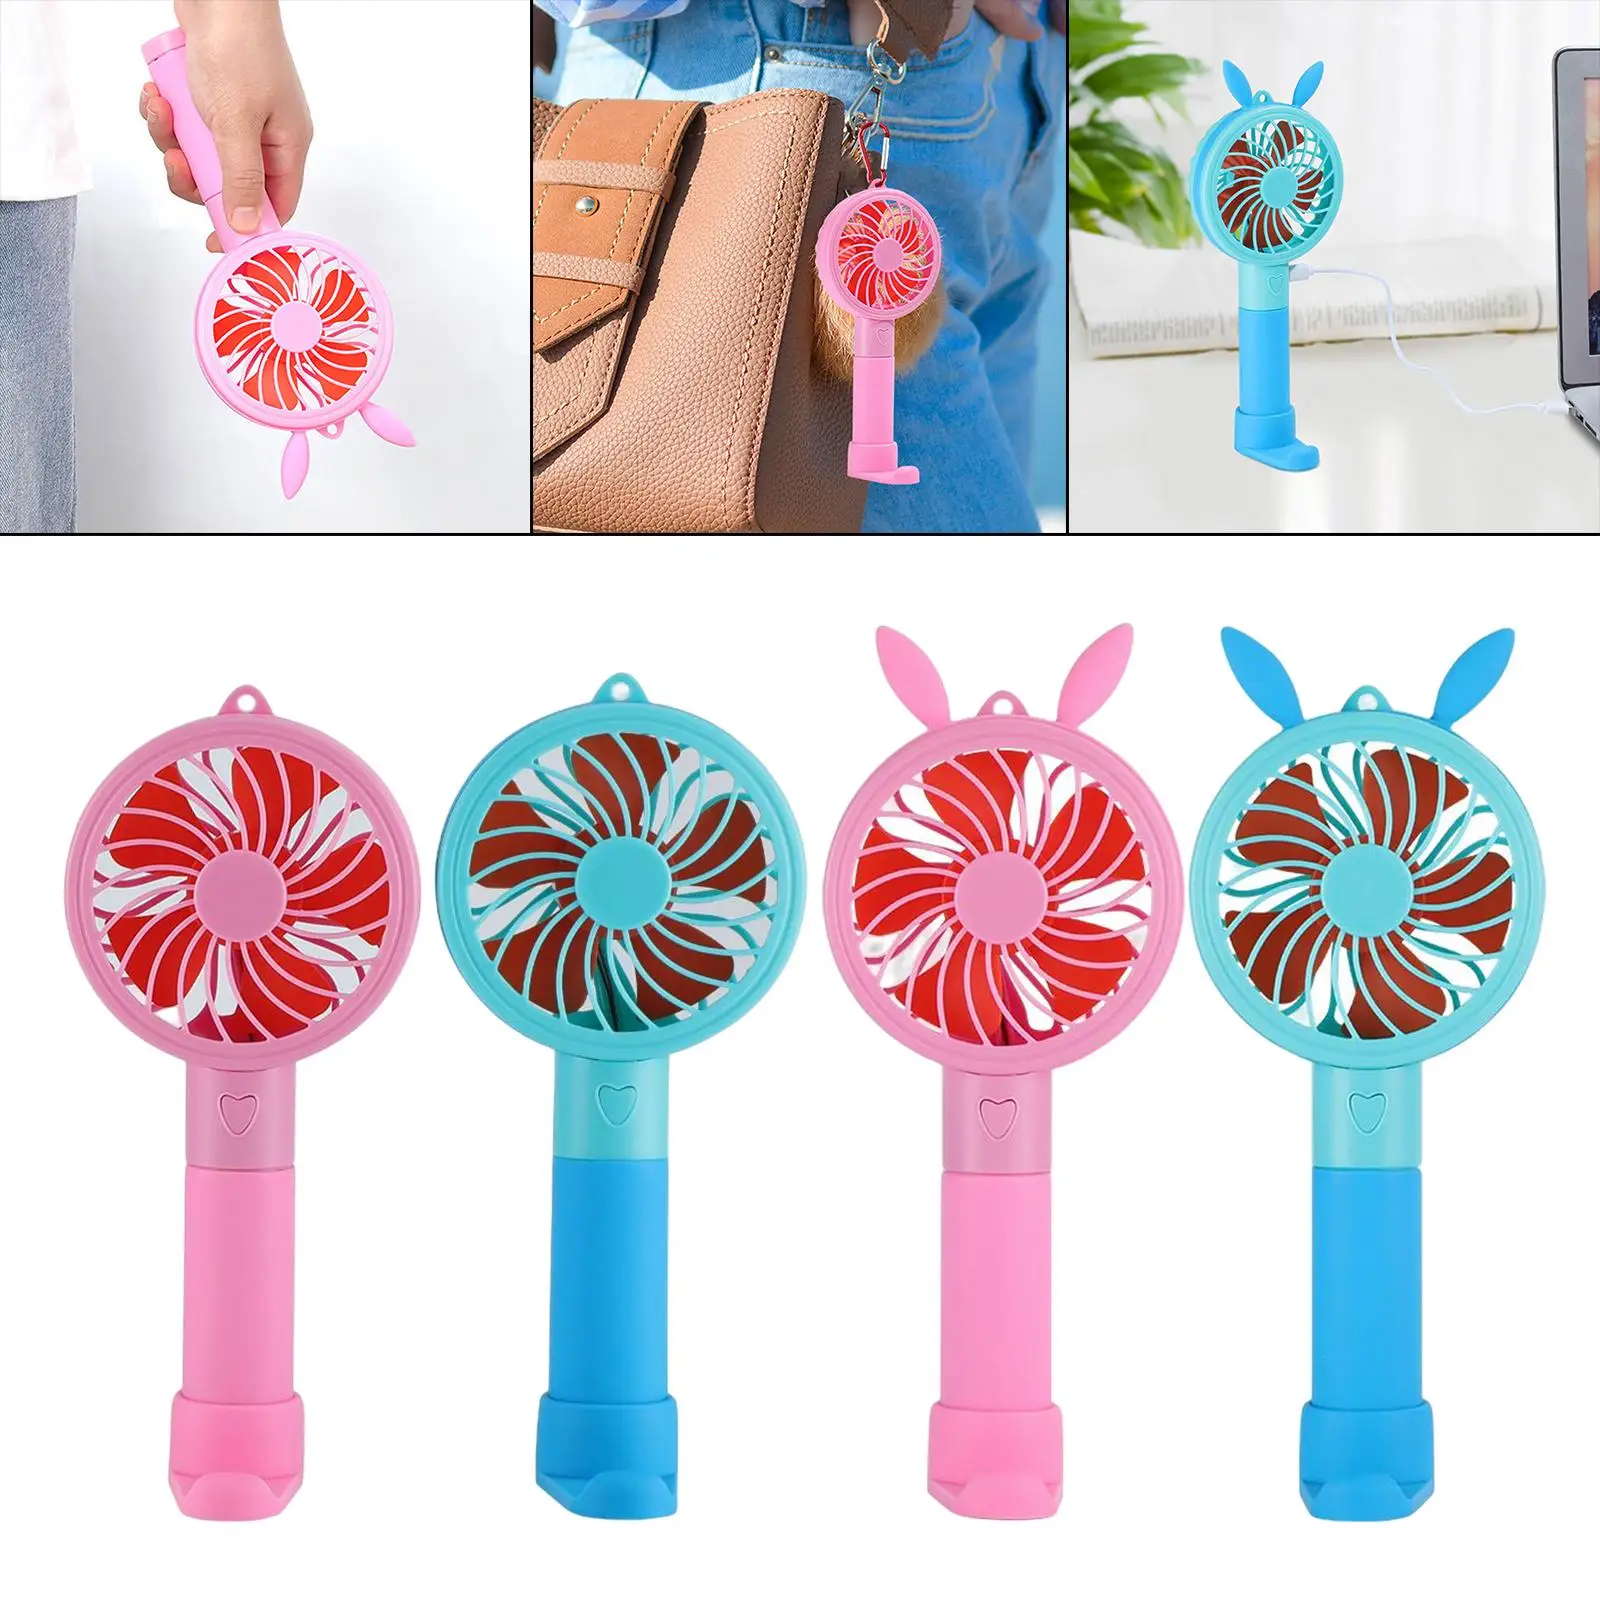 Portable Mini Hand-held Small Desk Fan Cooler Cooling USB Rechargeable